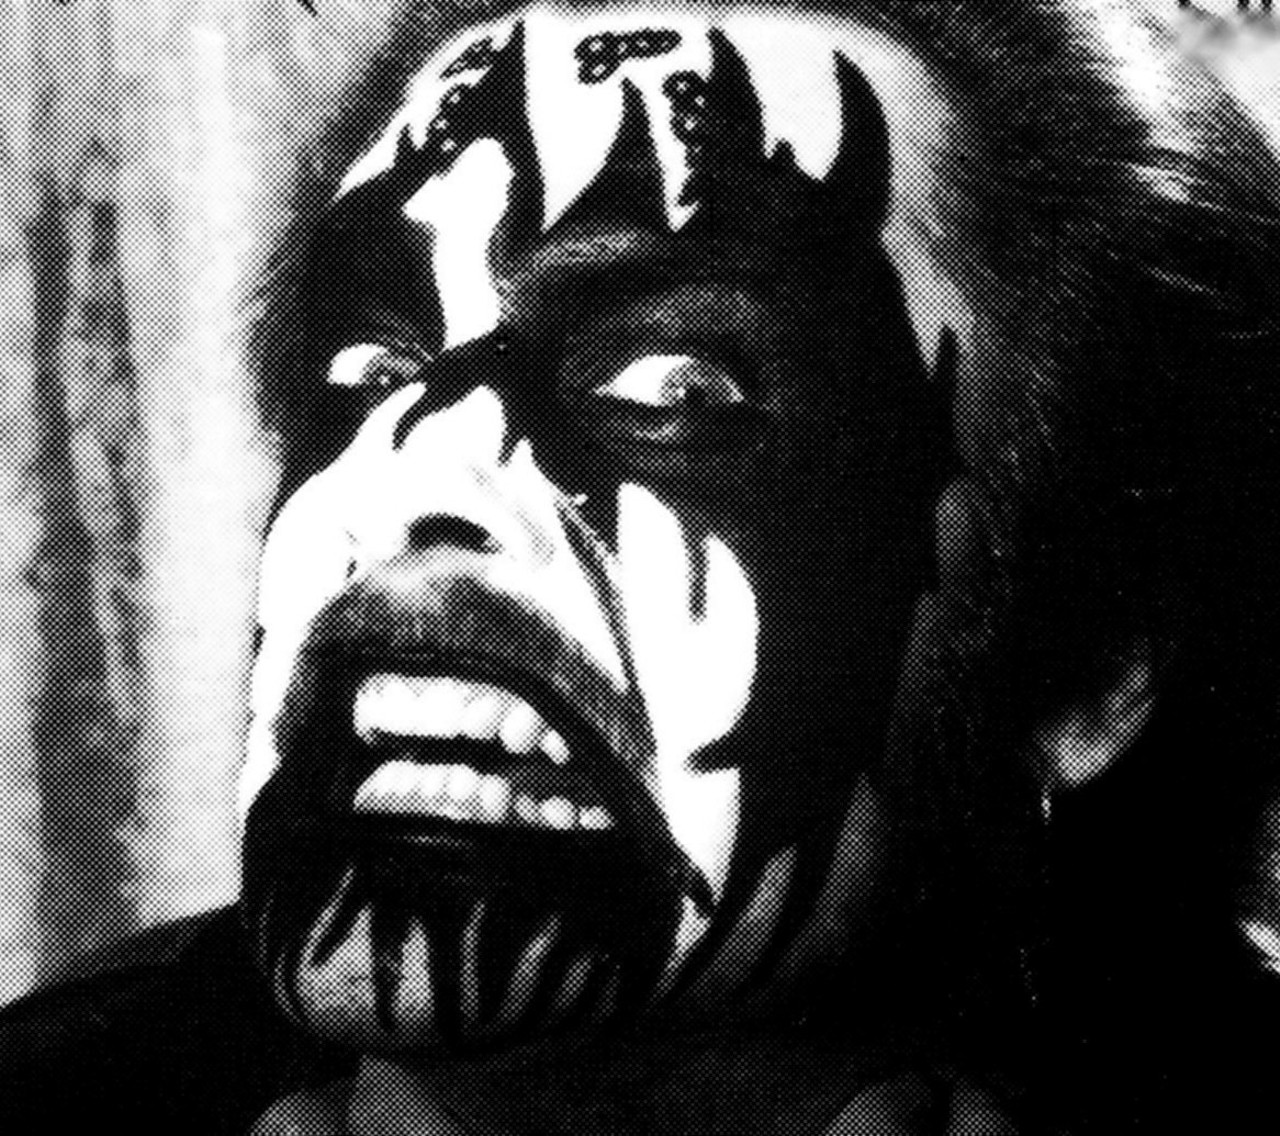 King Diamond shows us that in addition to a fierce scowl, fearsome corpse paint is crucial to the metal look. Here Mr. Diamond takes a very heavy-handed approach to the color of nothingness.